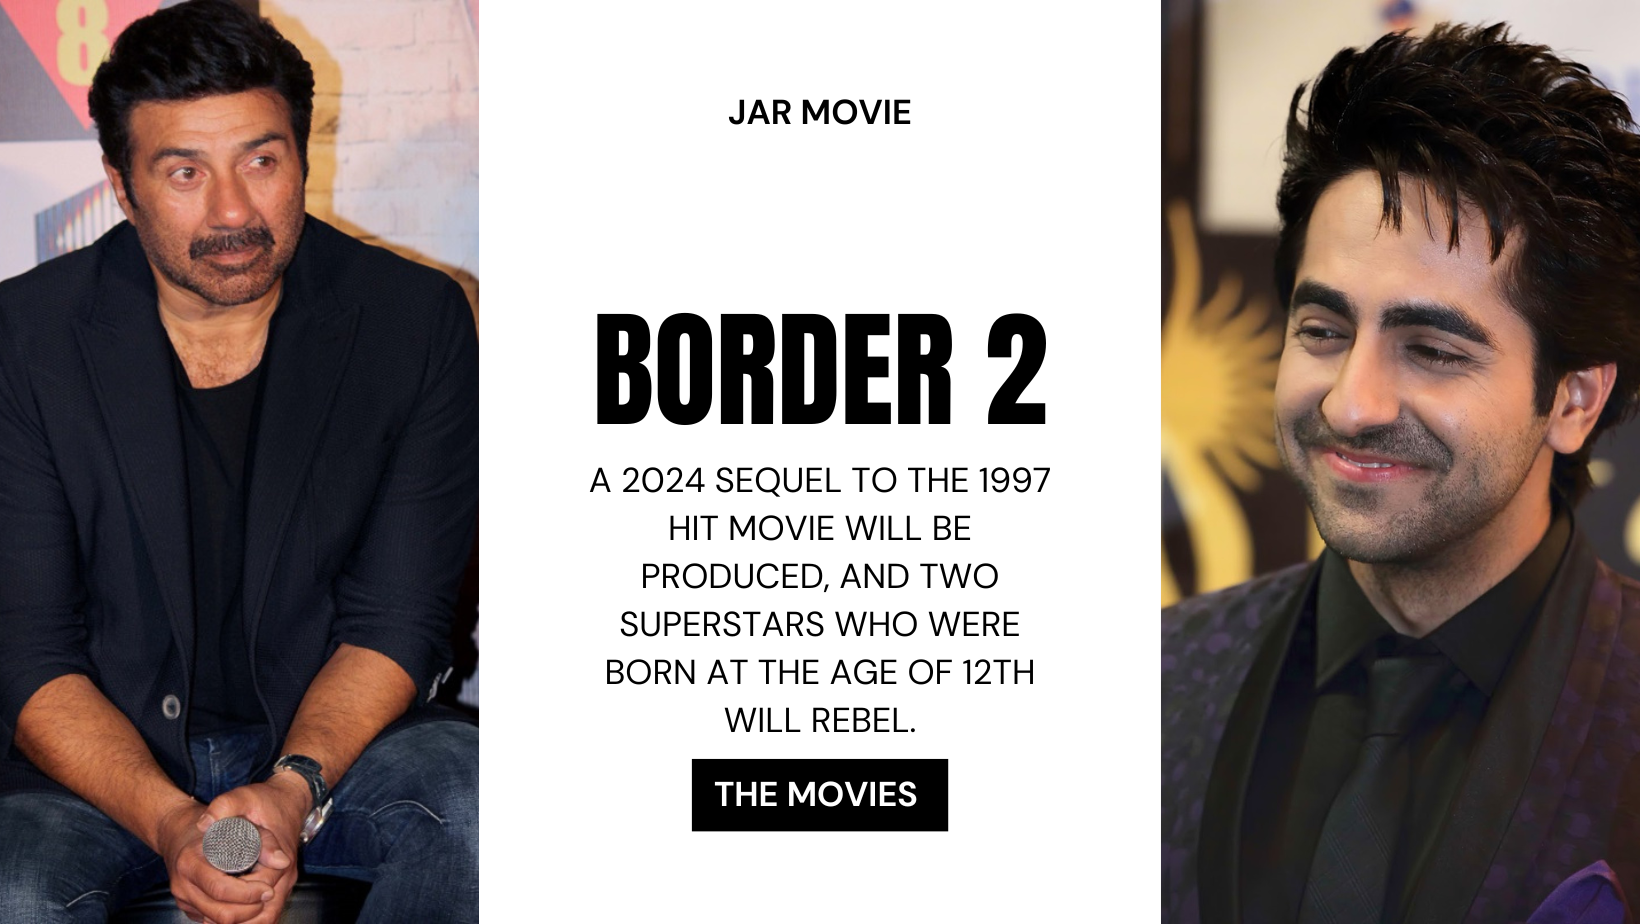 A 2024 sequel to the 1997 hit movie will be produced, and two superstars who were born at the age of 12th will rebel.